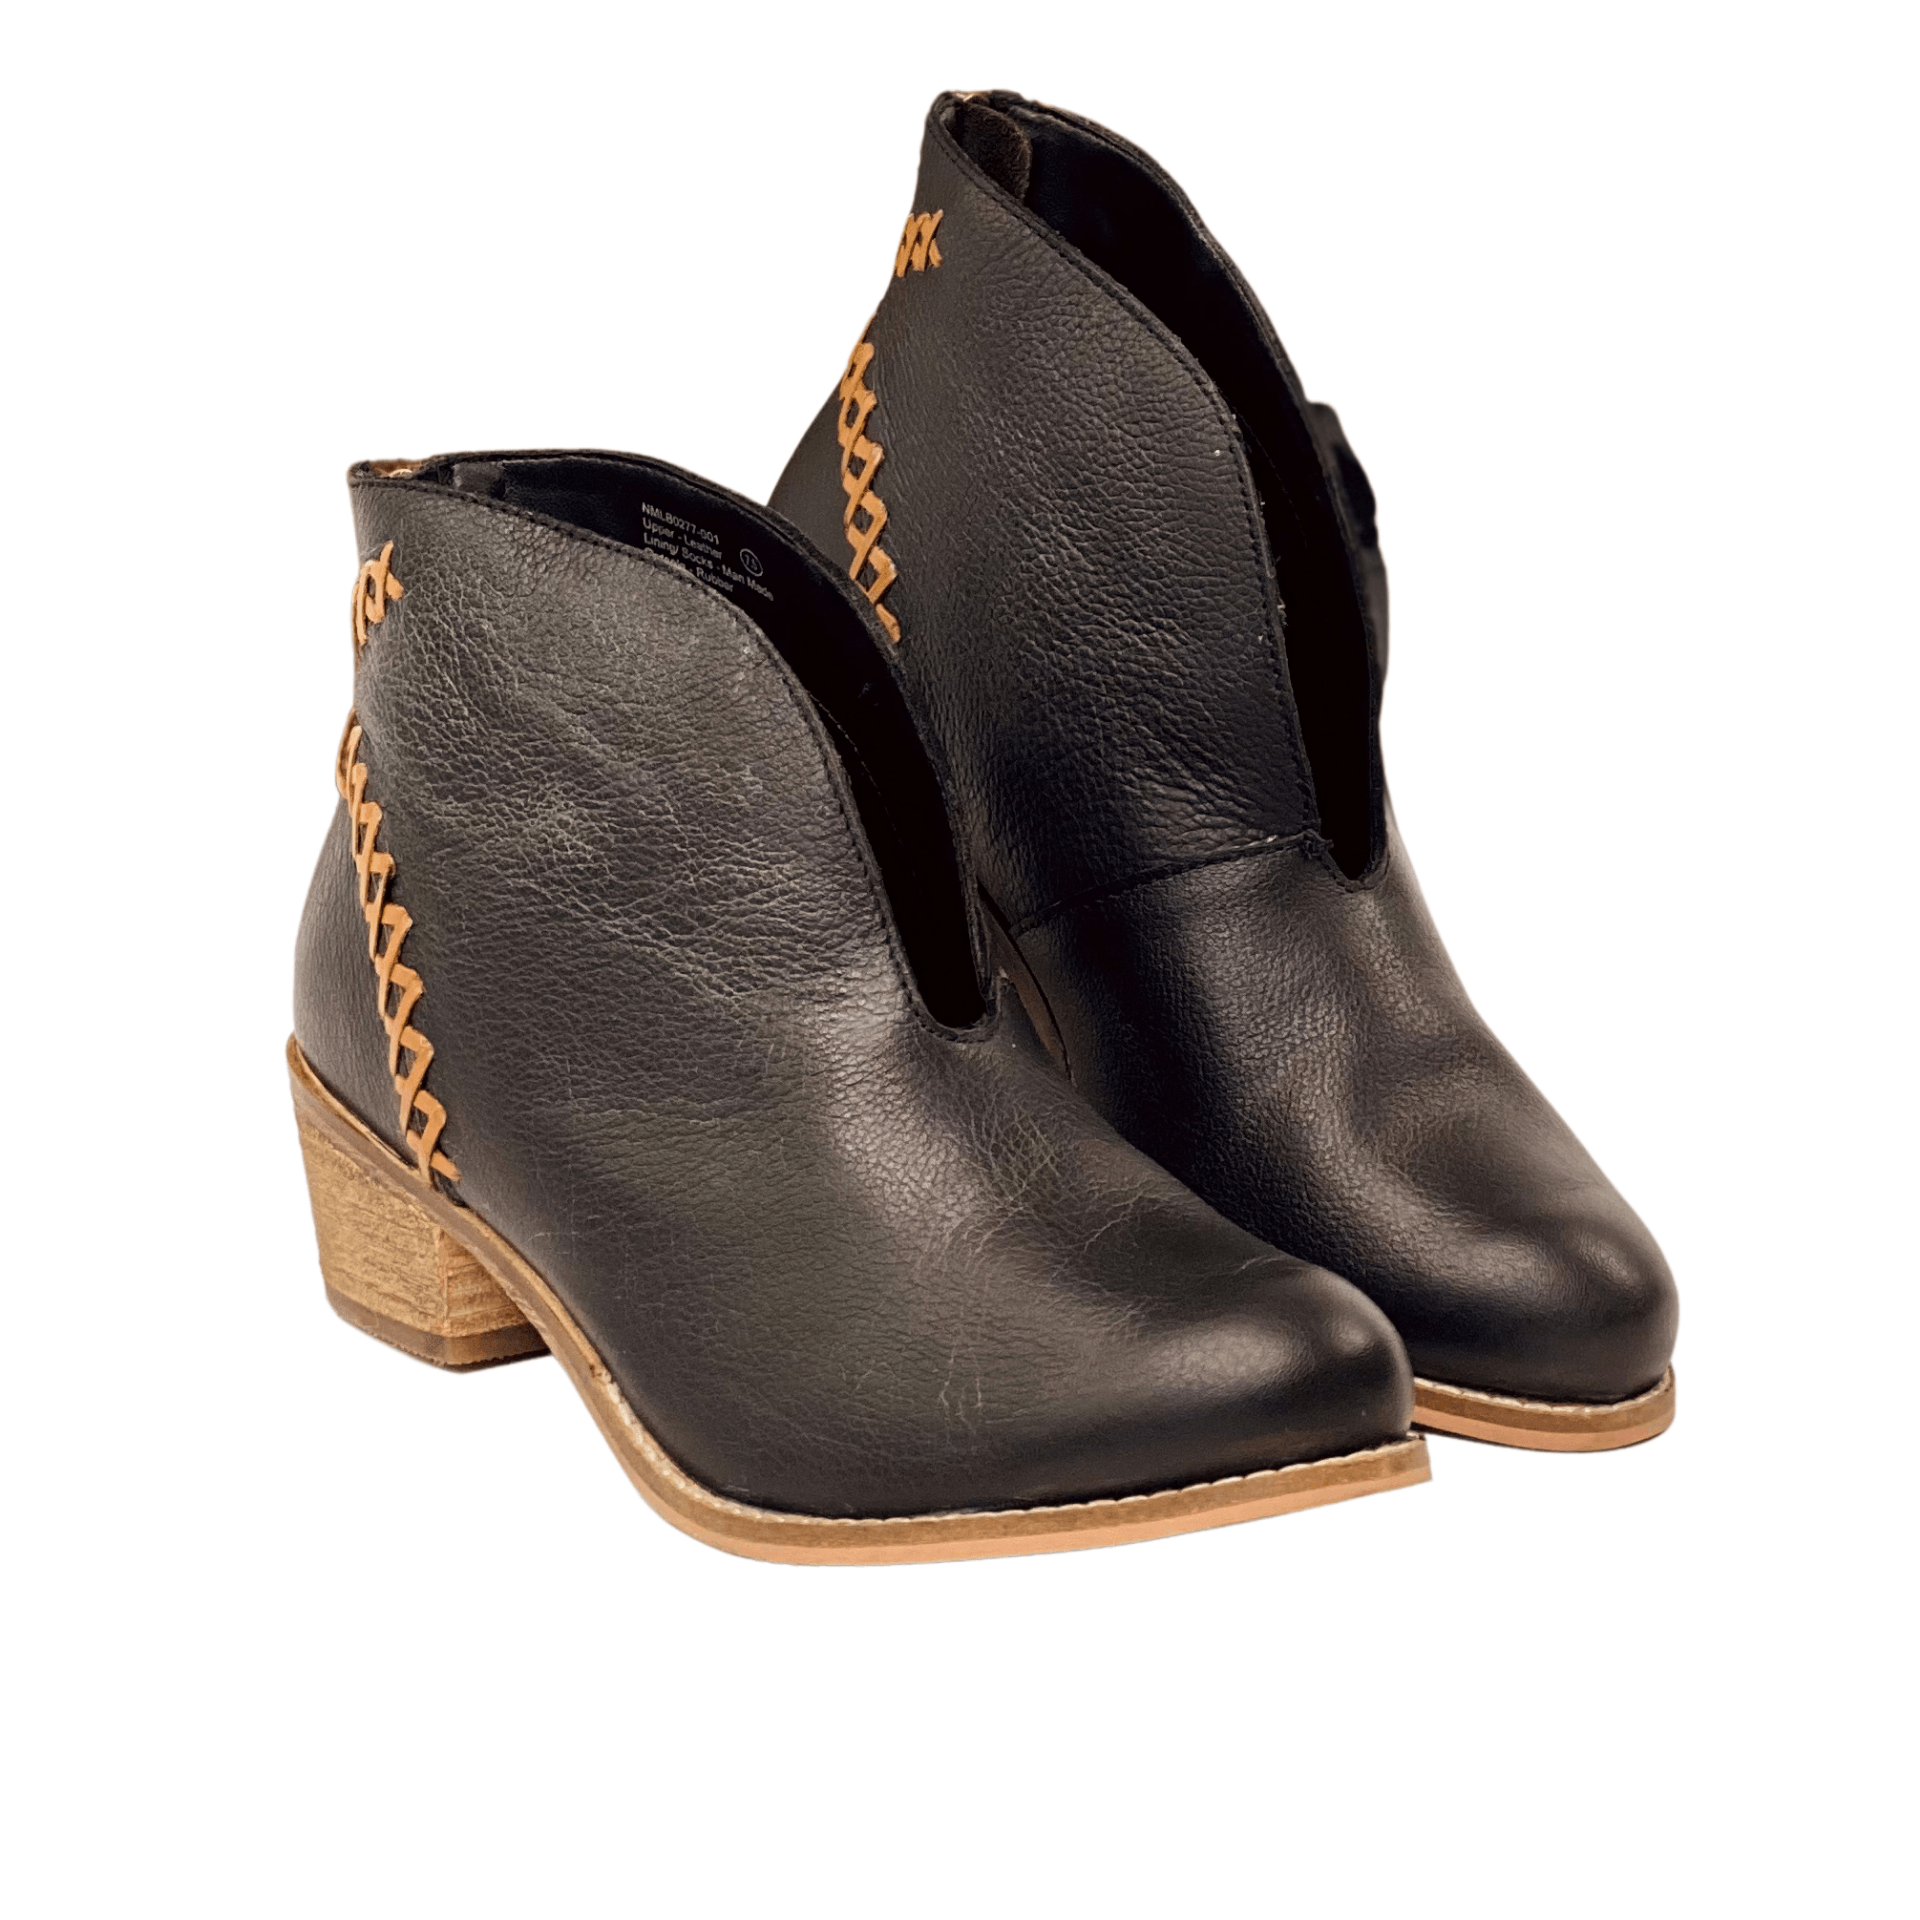 Naughty Monkey All Roads Bootie in Black - cantonclothingcompany